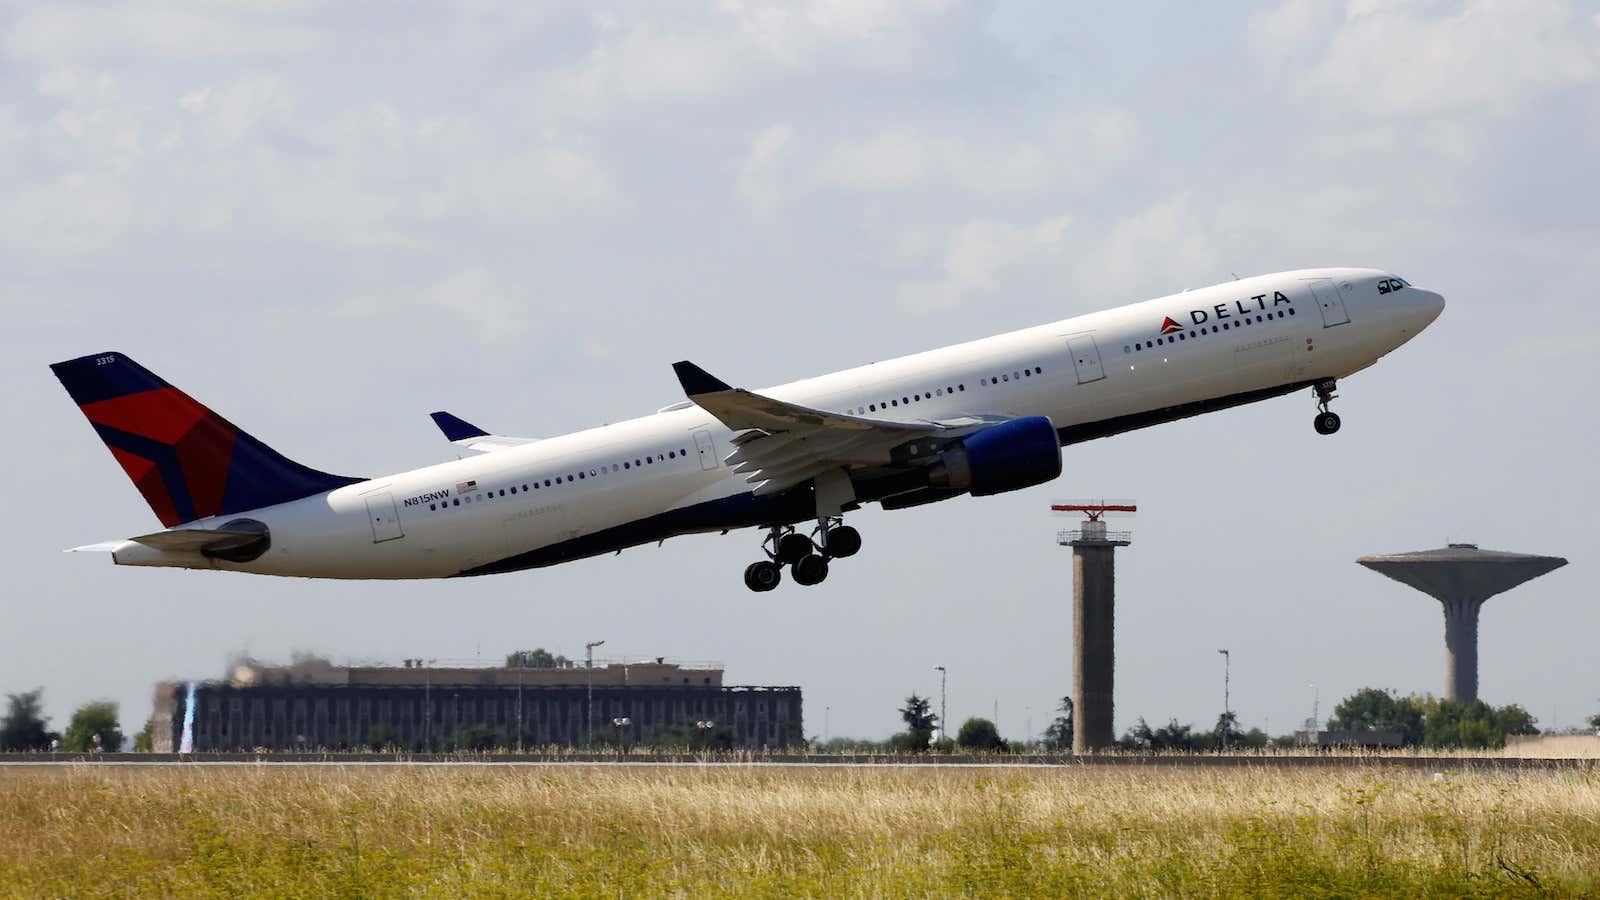 A Delta Air Lines Airbus A330 aircraft takes off at the Charles de Gaulle airport in Roissy, France, August 9, 2016. REUTERS/Jacky Naegelen – RTSMOQ8